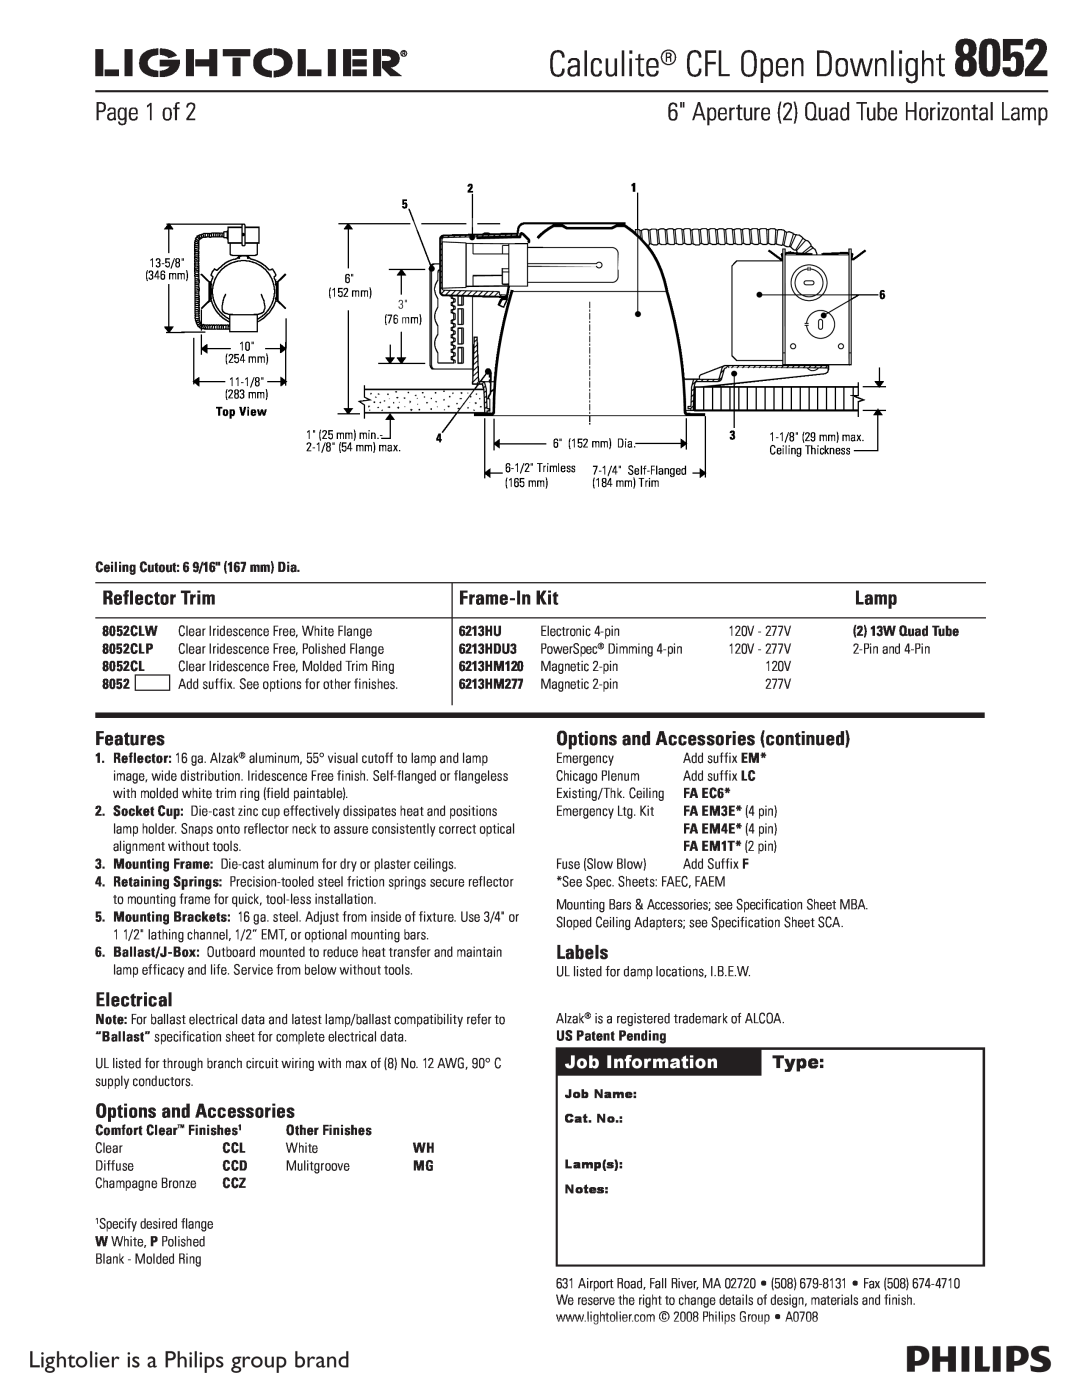 Lightolier 8052 specifications Aperture 2 Quad Tube Horizontal Lamp, Page 1 of, Lightolier is a Philips group brand, Type 